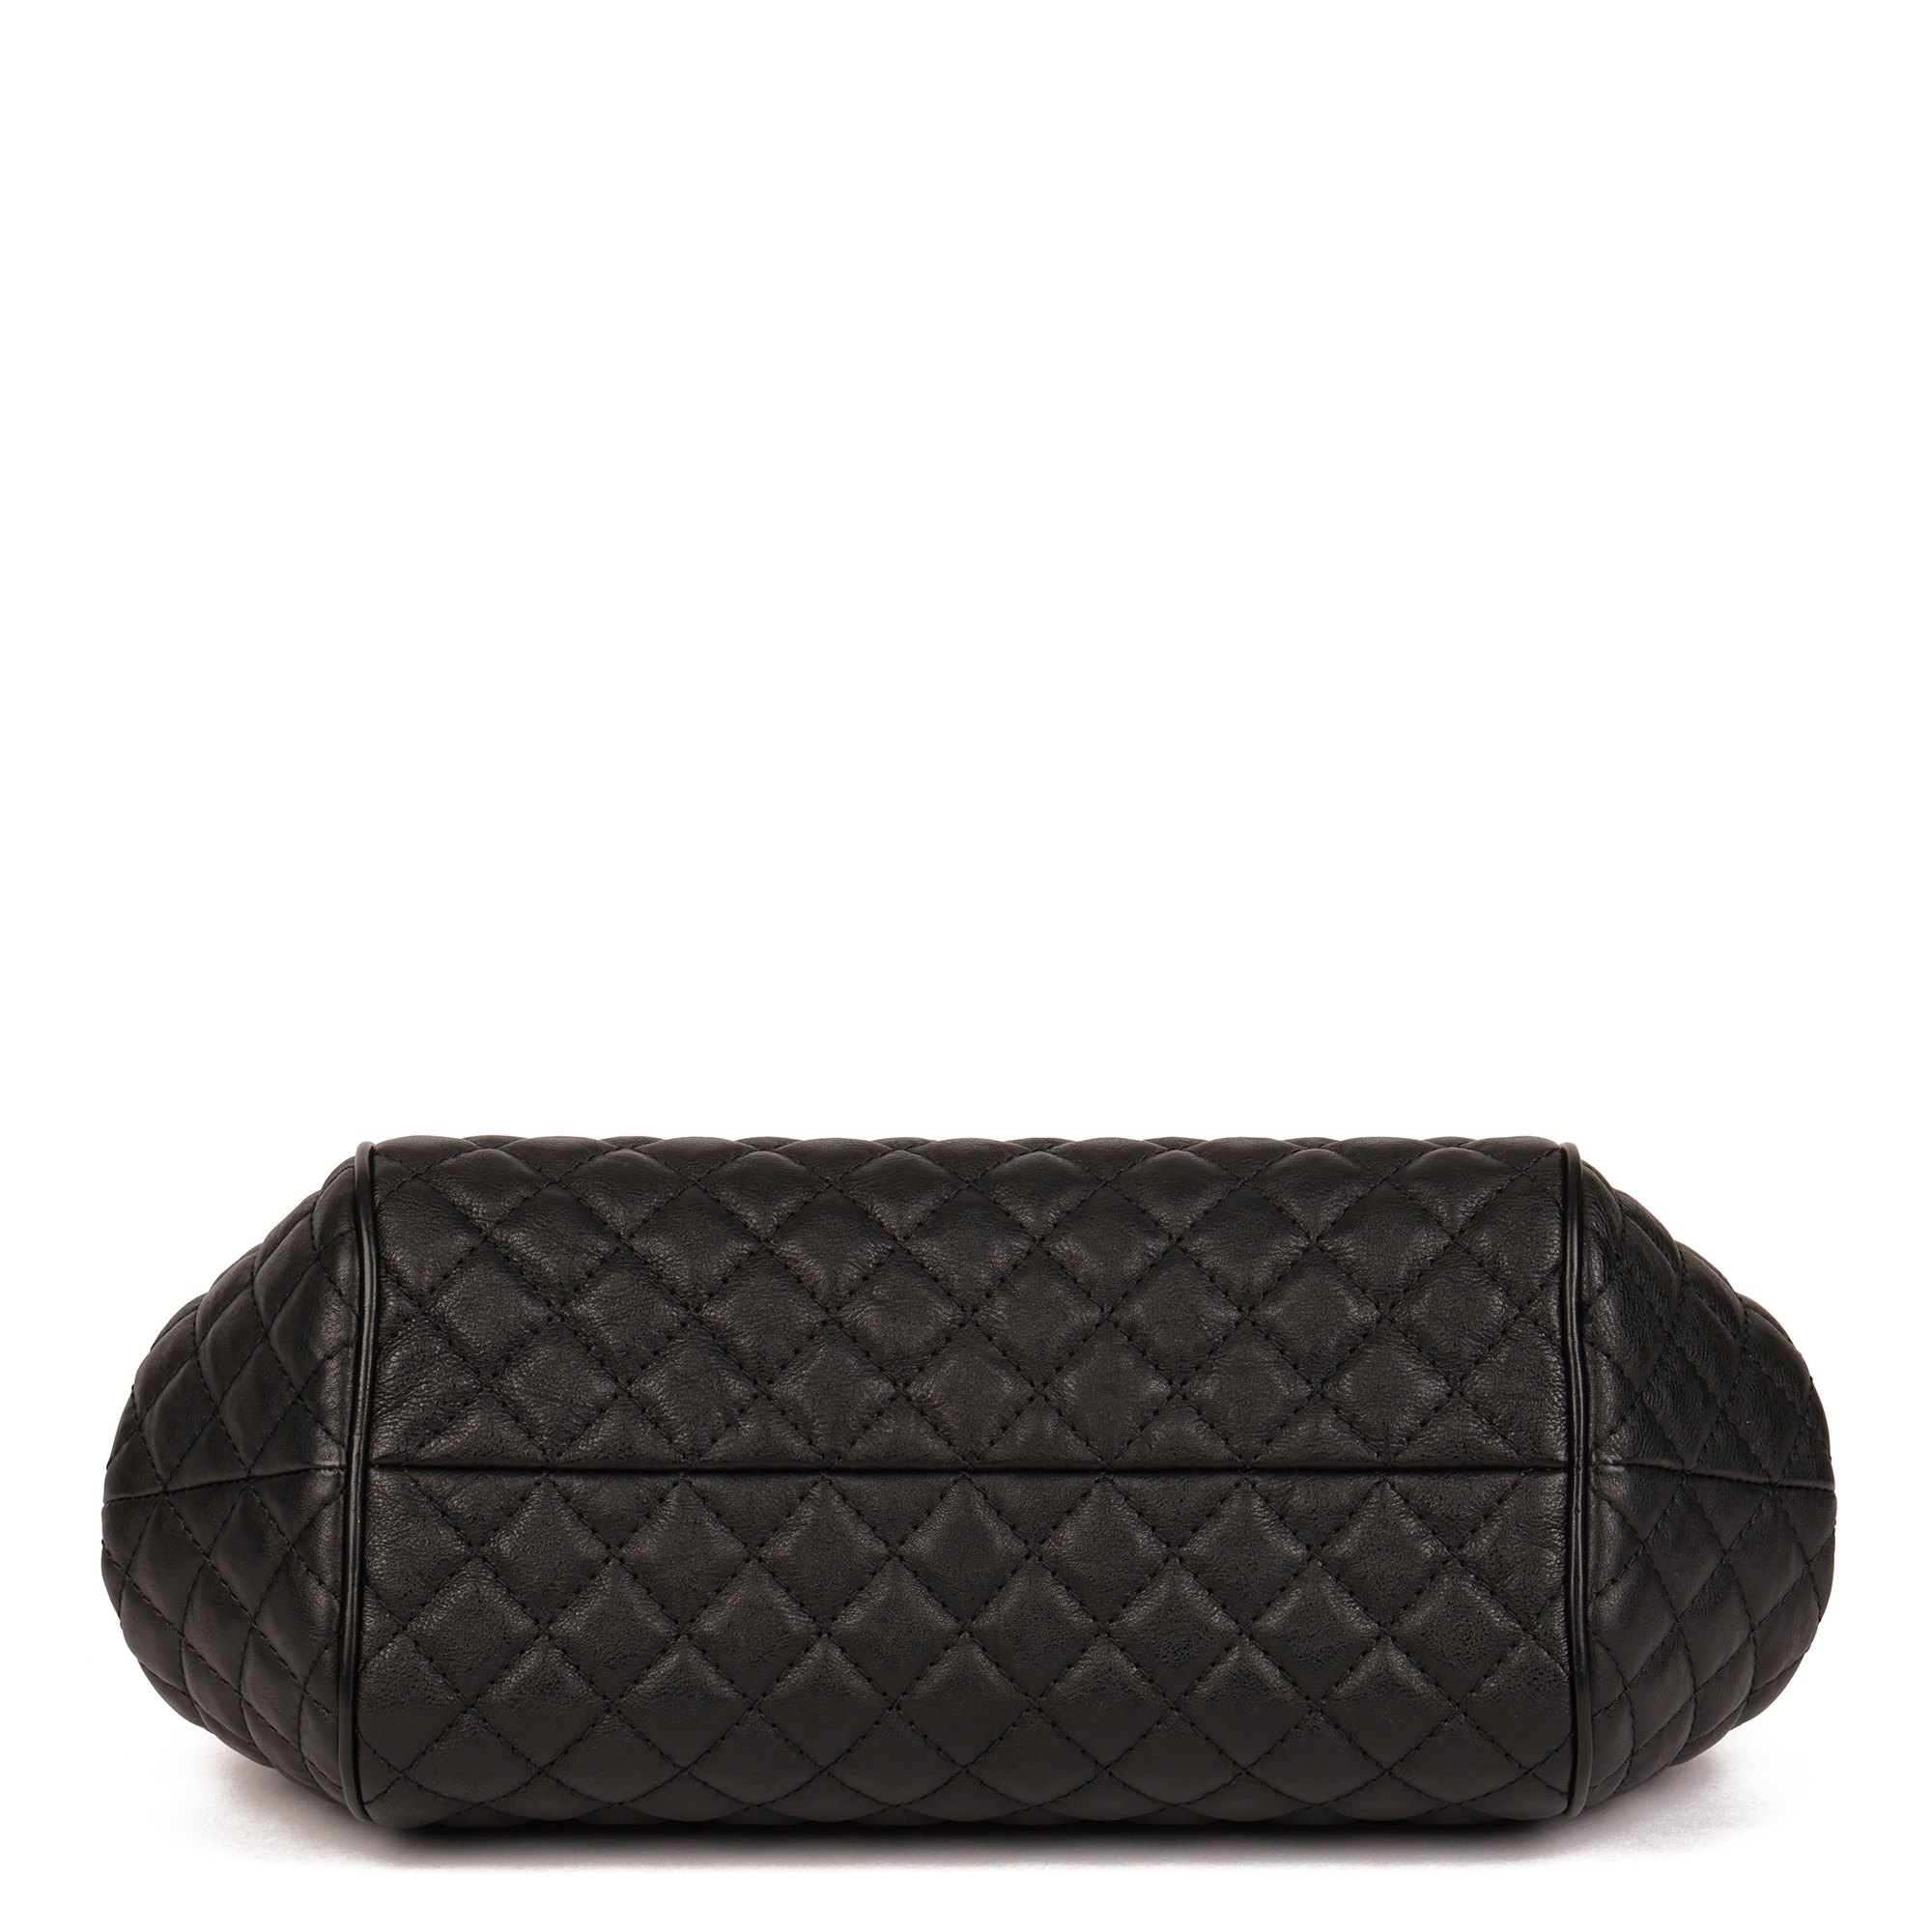 Chanel Black Quilted Calfskin Leather Paris in Rome Colosseum Kiss Lock Bowling Bag